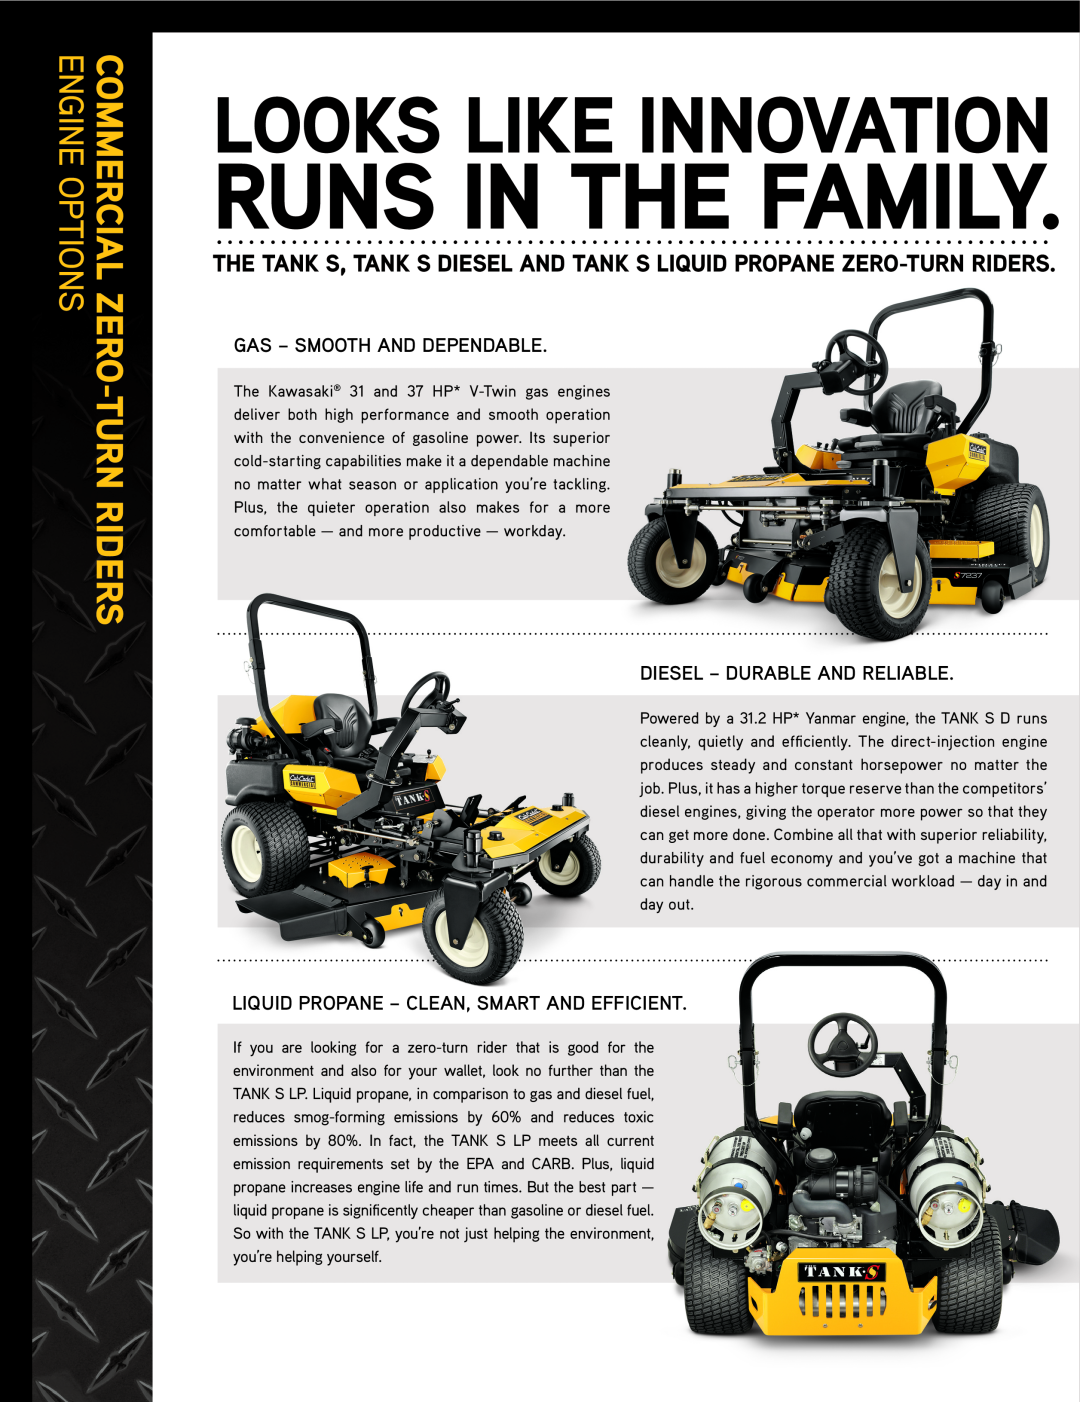 Cub Cadet 6031 manual runs in the family, looks like innovation, Commercial Zero-Turn Riders Engine Options 